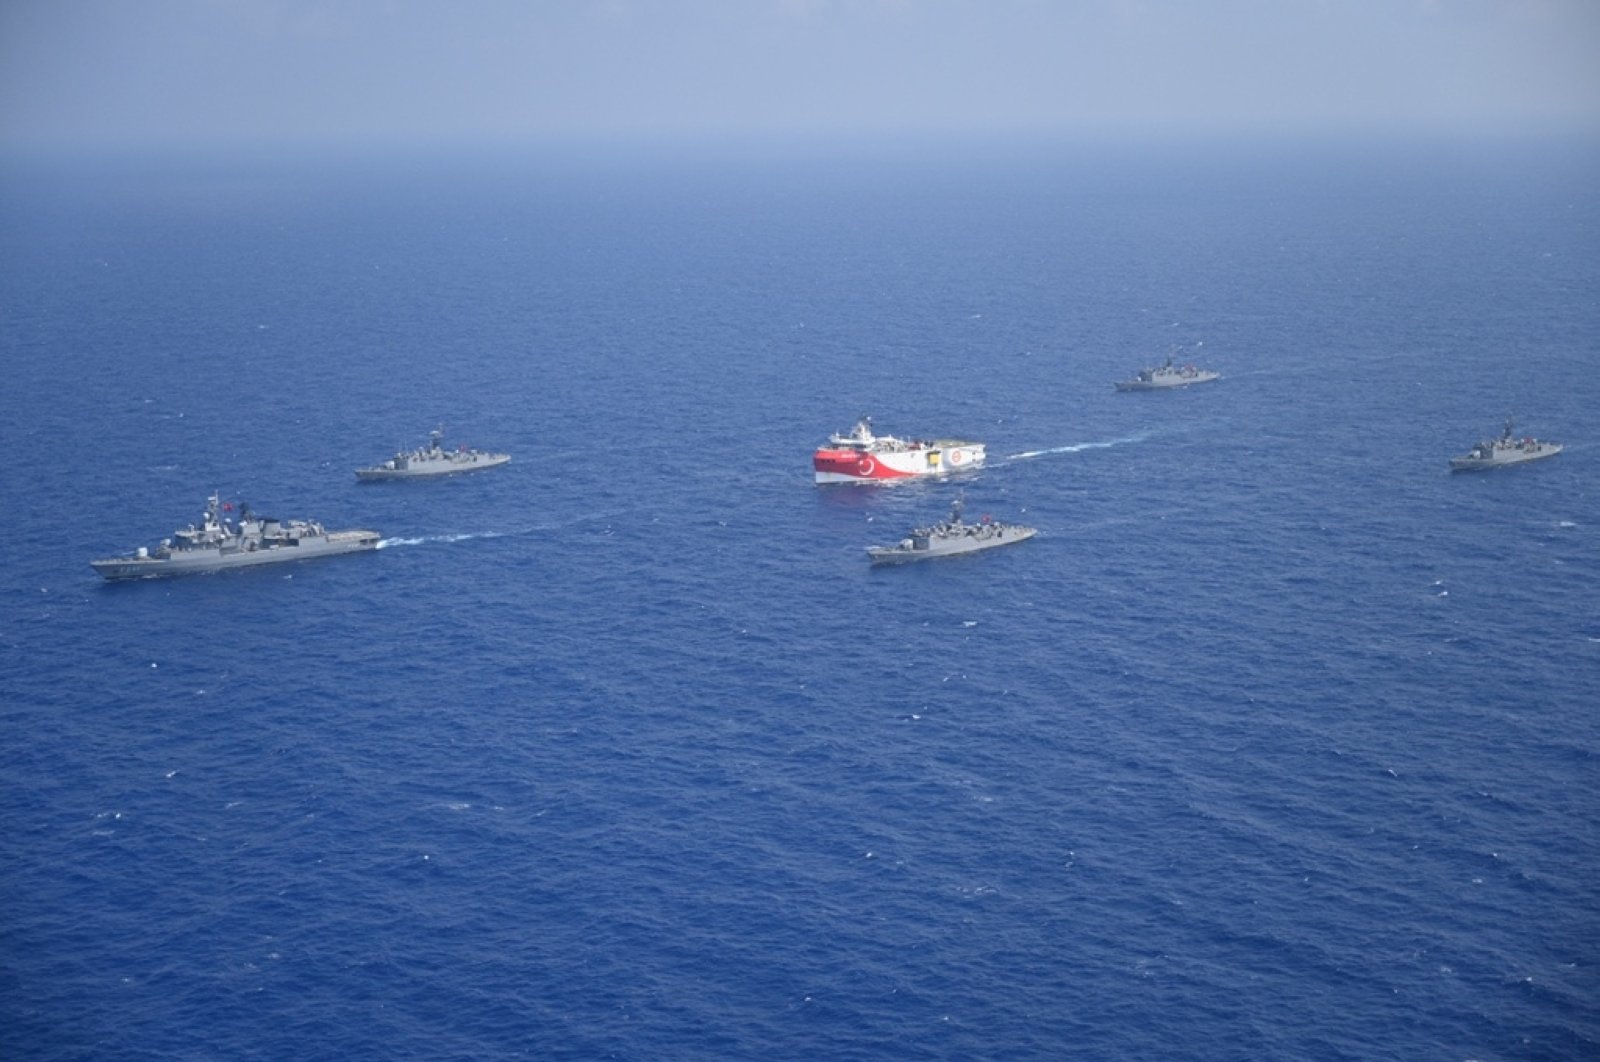 Turkish seismic research vessel Oruc Reis is escorted by Turkish Navy ships as it sets sail in the Mediterranean Sea, off Antalya, Turkey, Aug. 10, 2020. (Photo by Turkish Defense Ministry via Reuters )